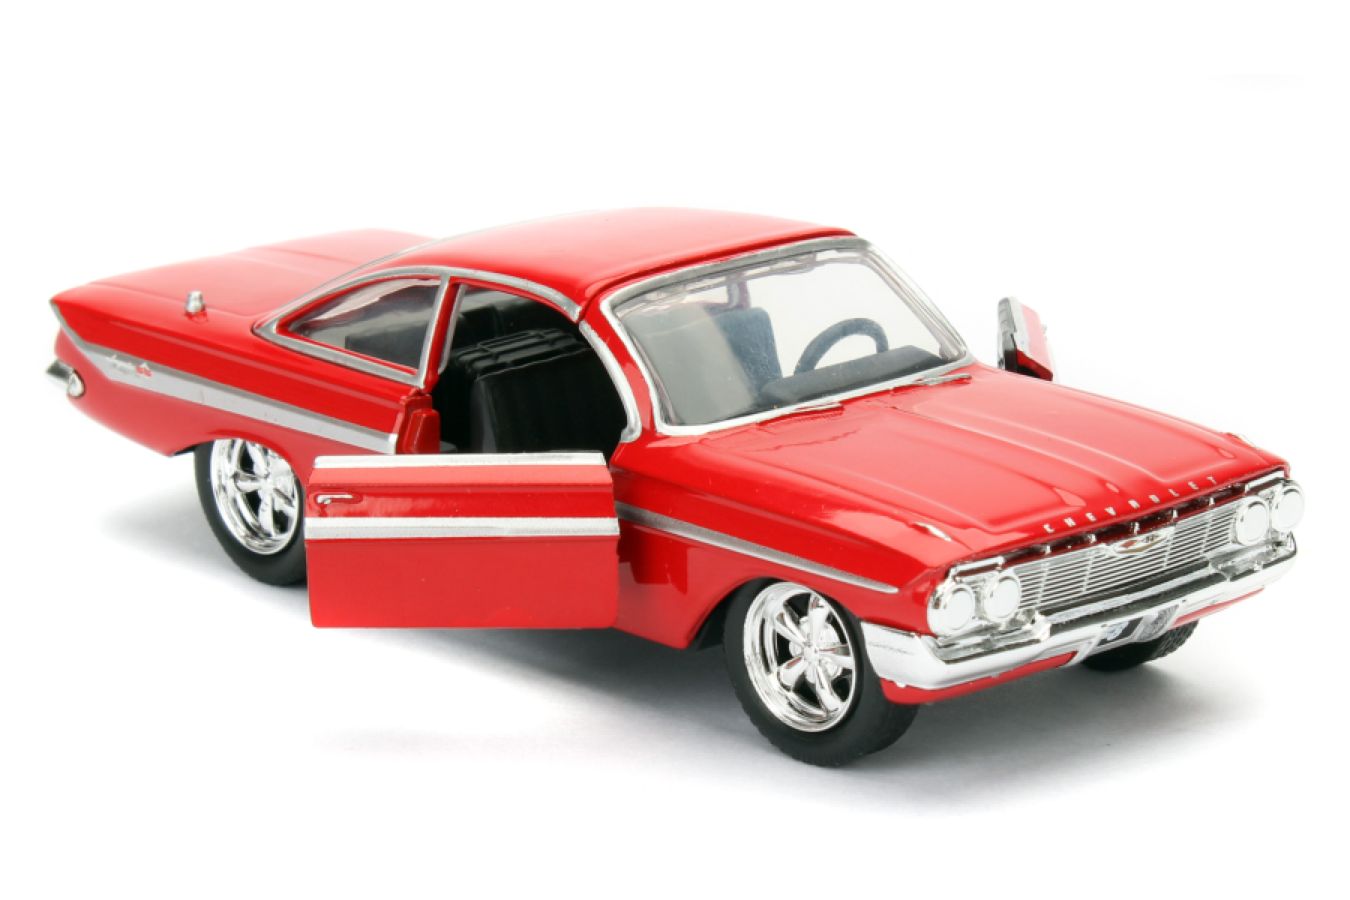 Fast and Furious - FF8 1961 Chevy Impala 1:32 Hollywood Ride